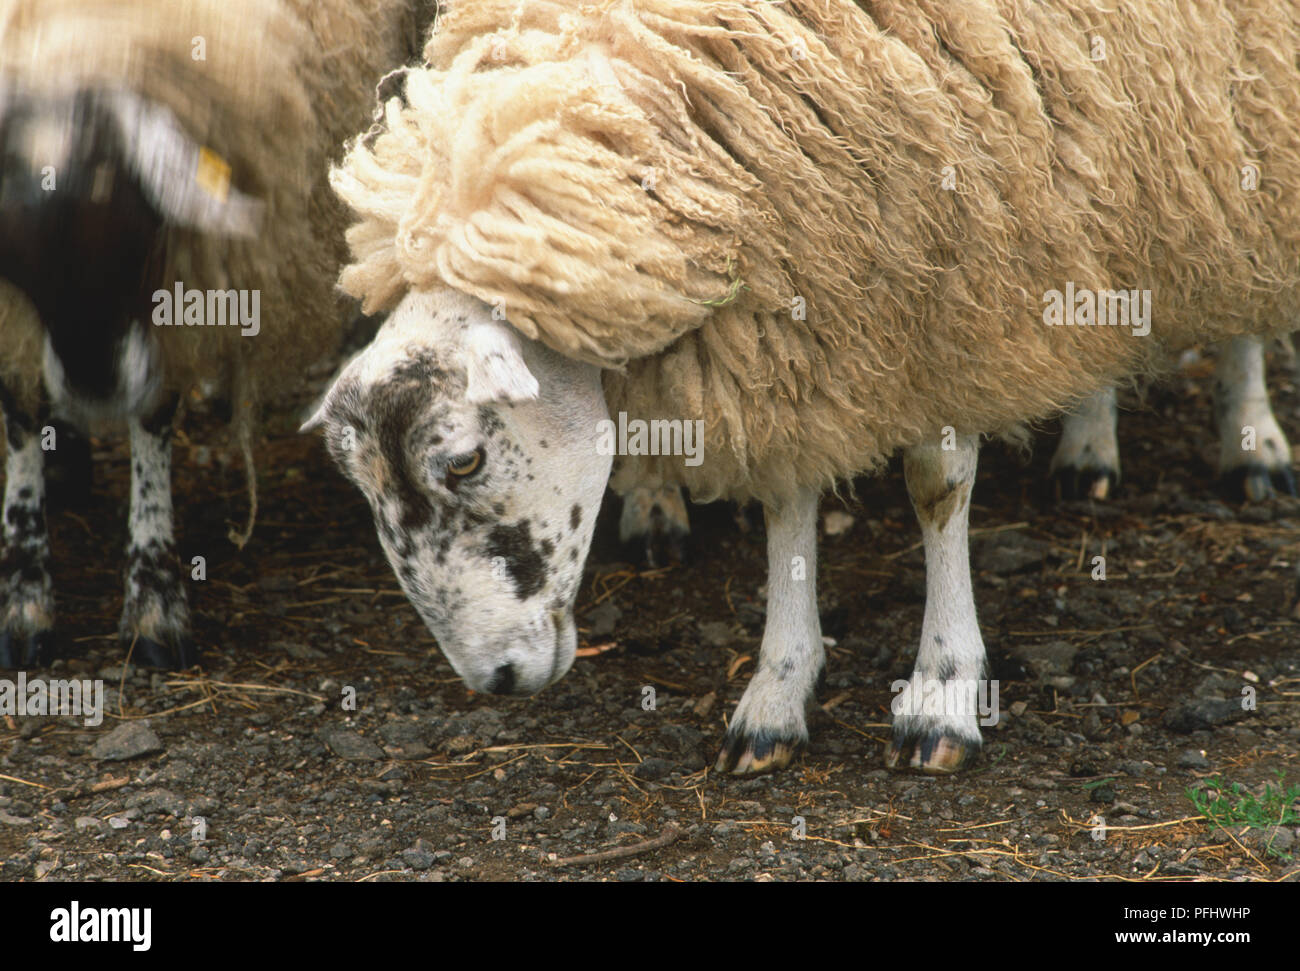 Sheep with black-stained head grazing among its herd, side view Stock Photo